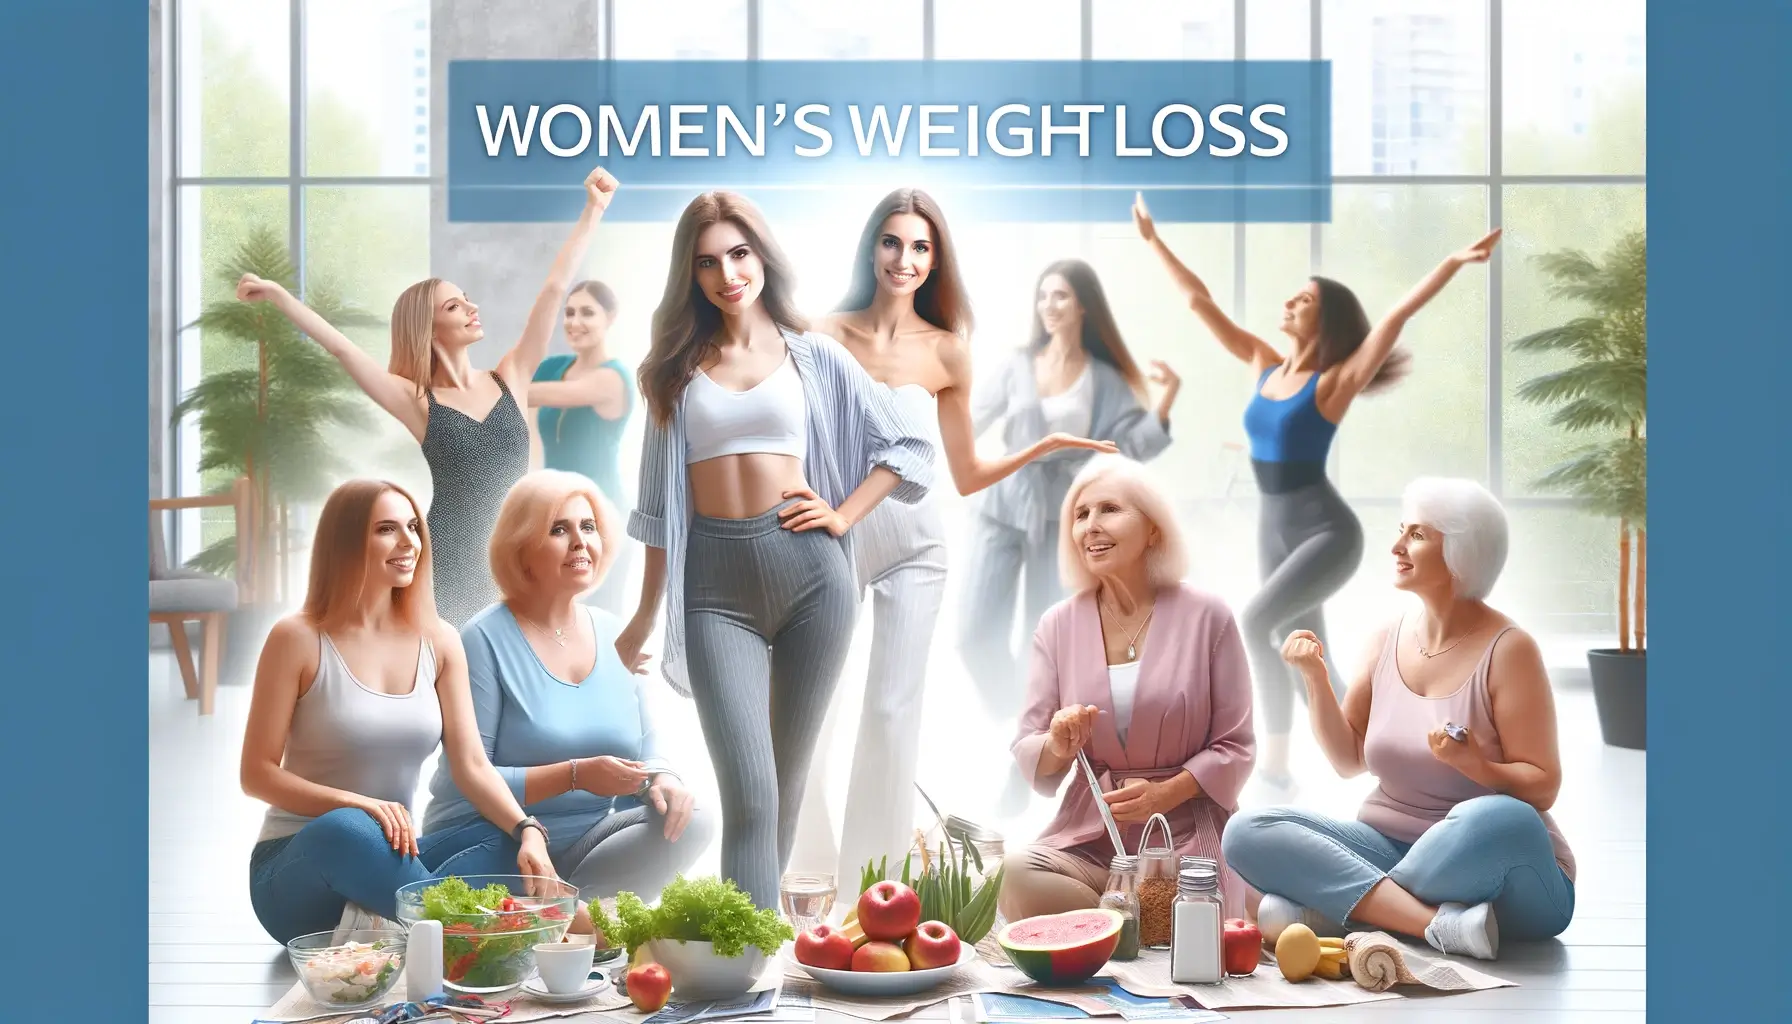 Diverse group of women engaging in healthy activities for weight loss, including exercise, balanced eating, and mindfulness